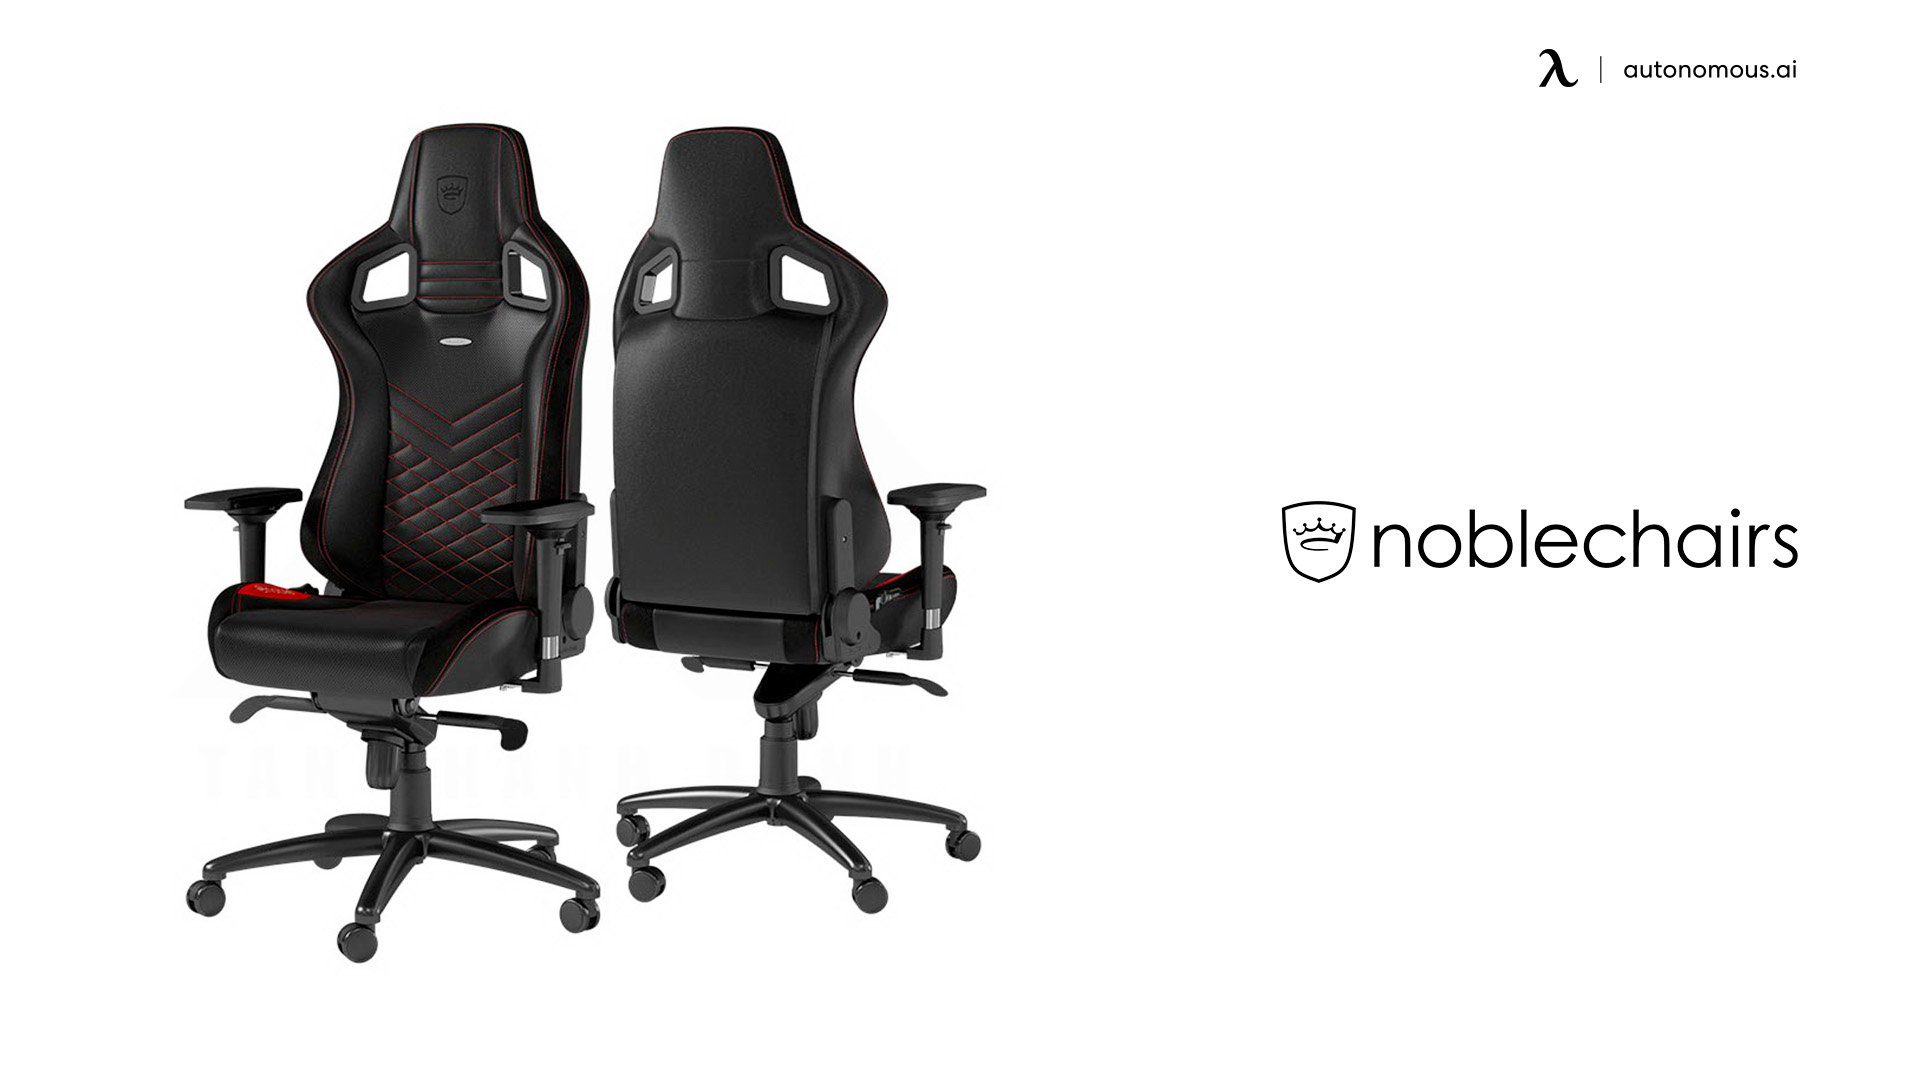 Noblechairs gaming chair brand